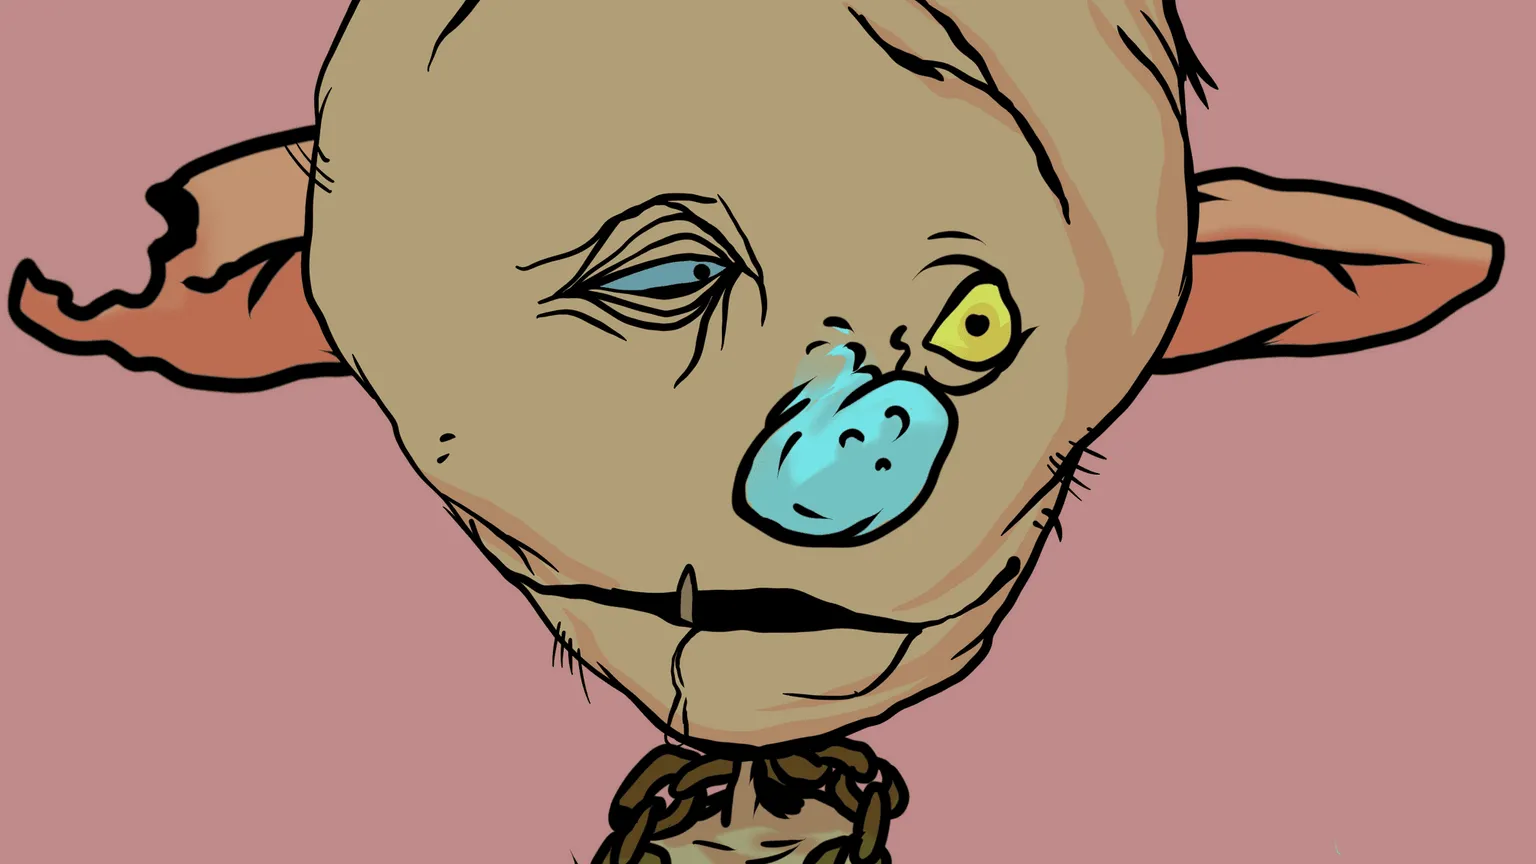 Close up illustration of a goblin's face. Very ugly. Blue nose, lazy eyes, and drooling expression.